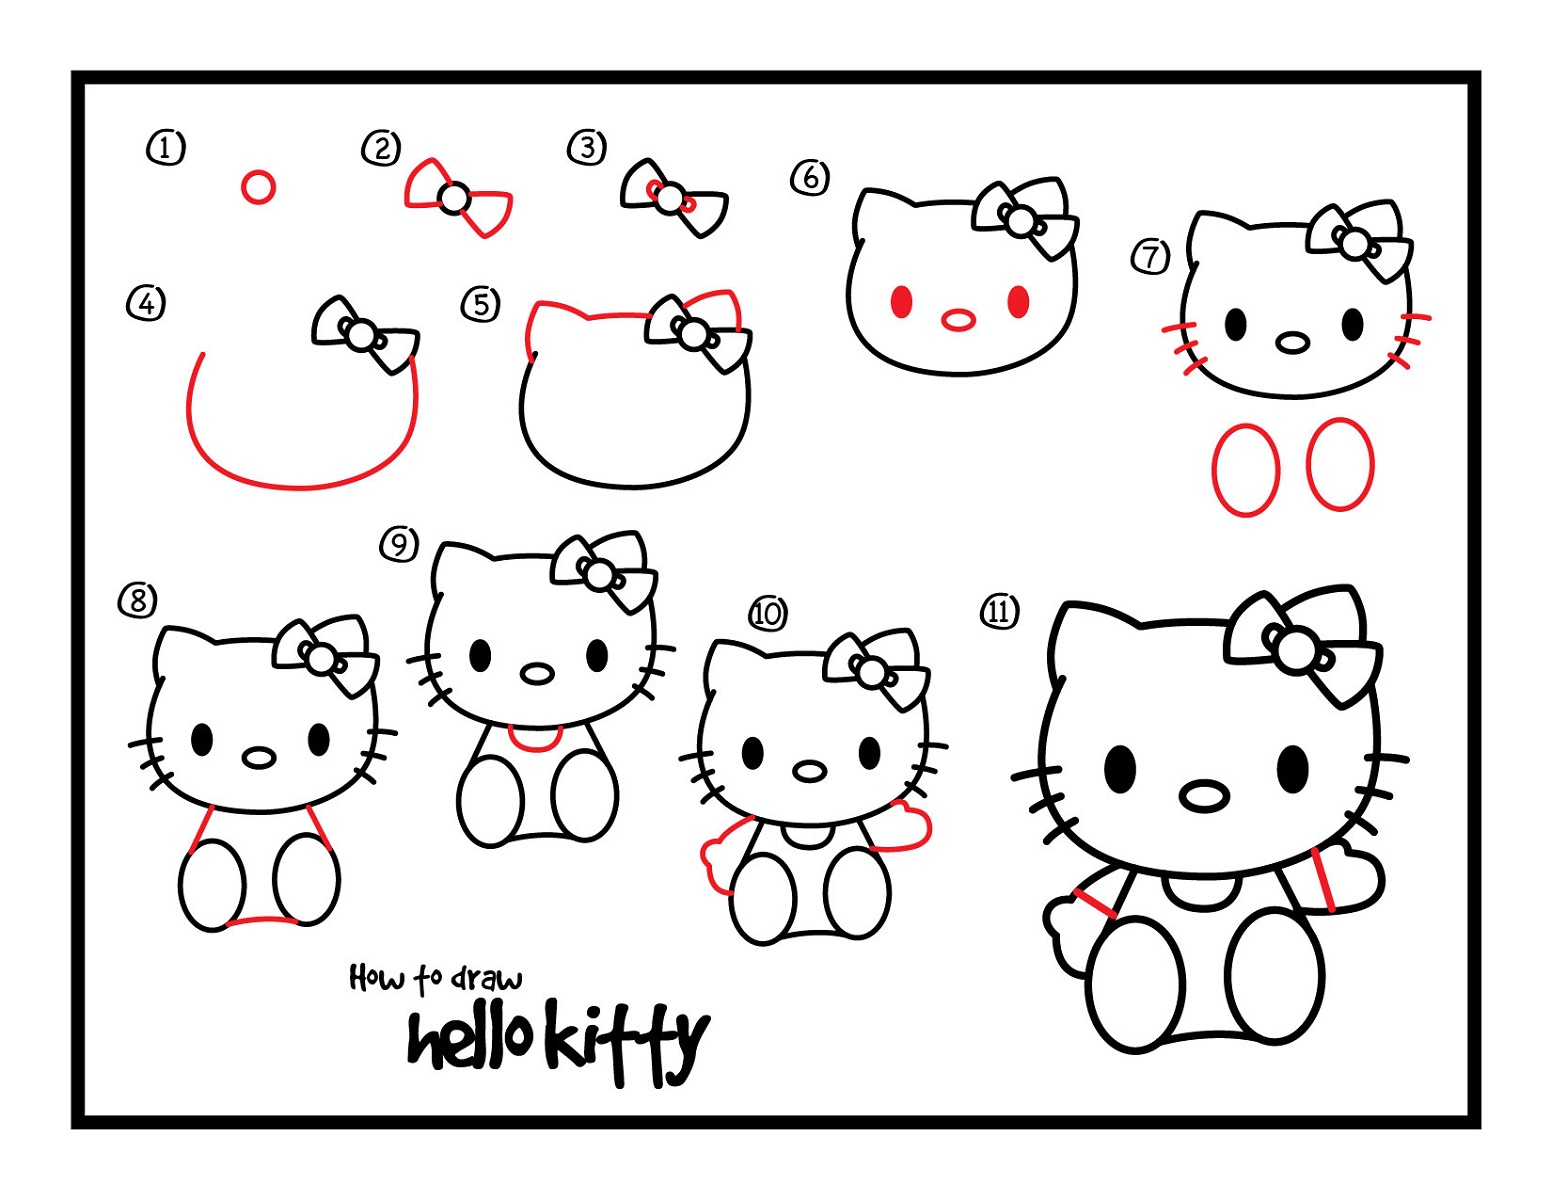 Drawing Sheets For Kids Hello Kitty Worksheets - Hello Kitty Drawing For Ki...